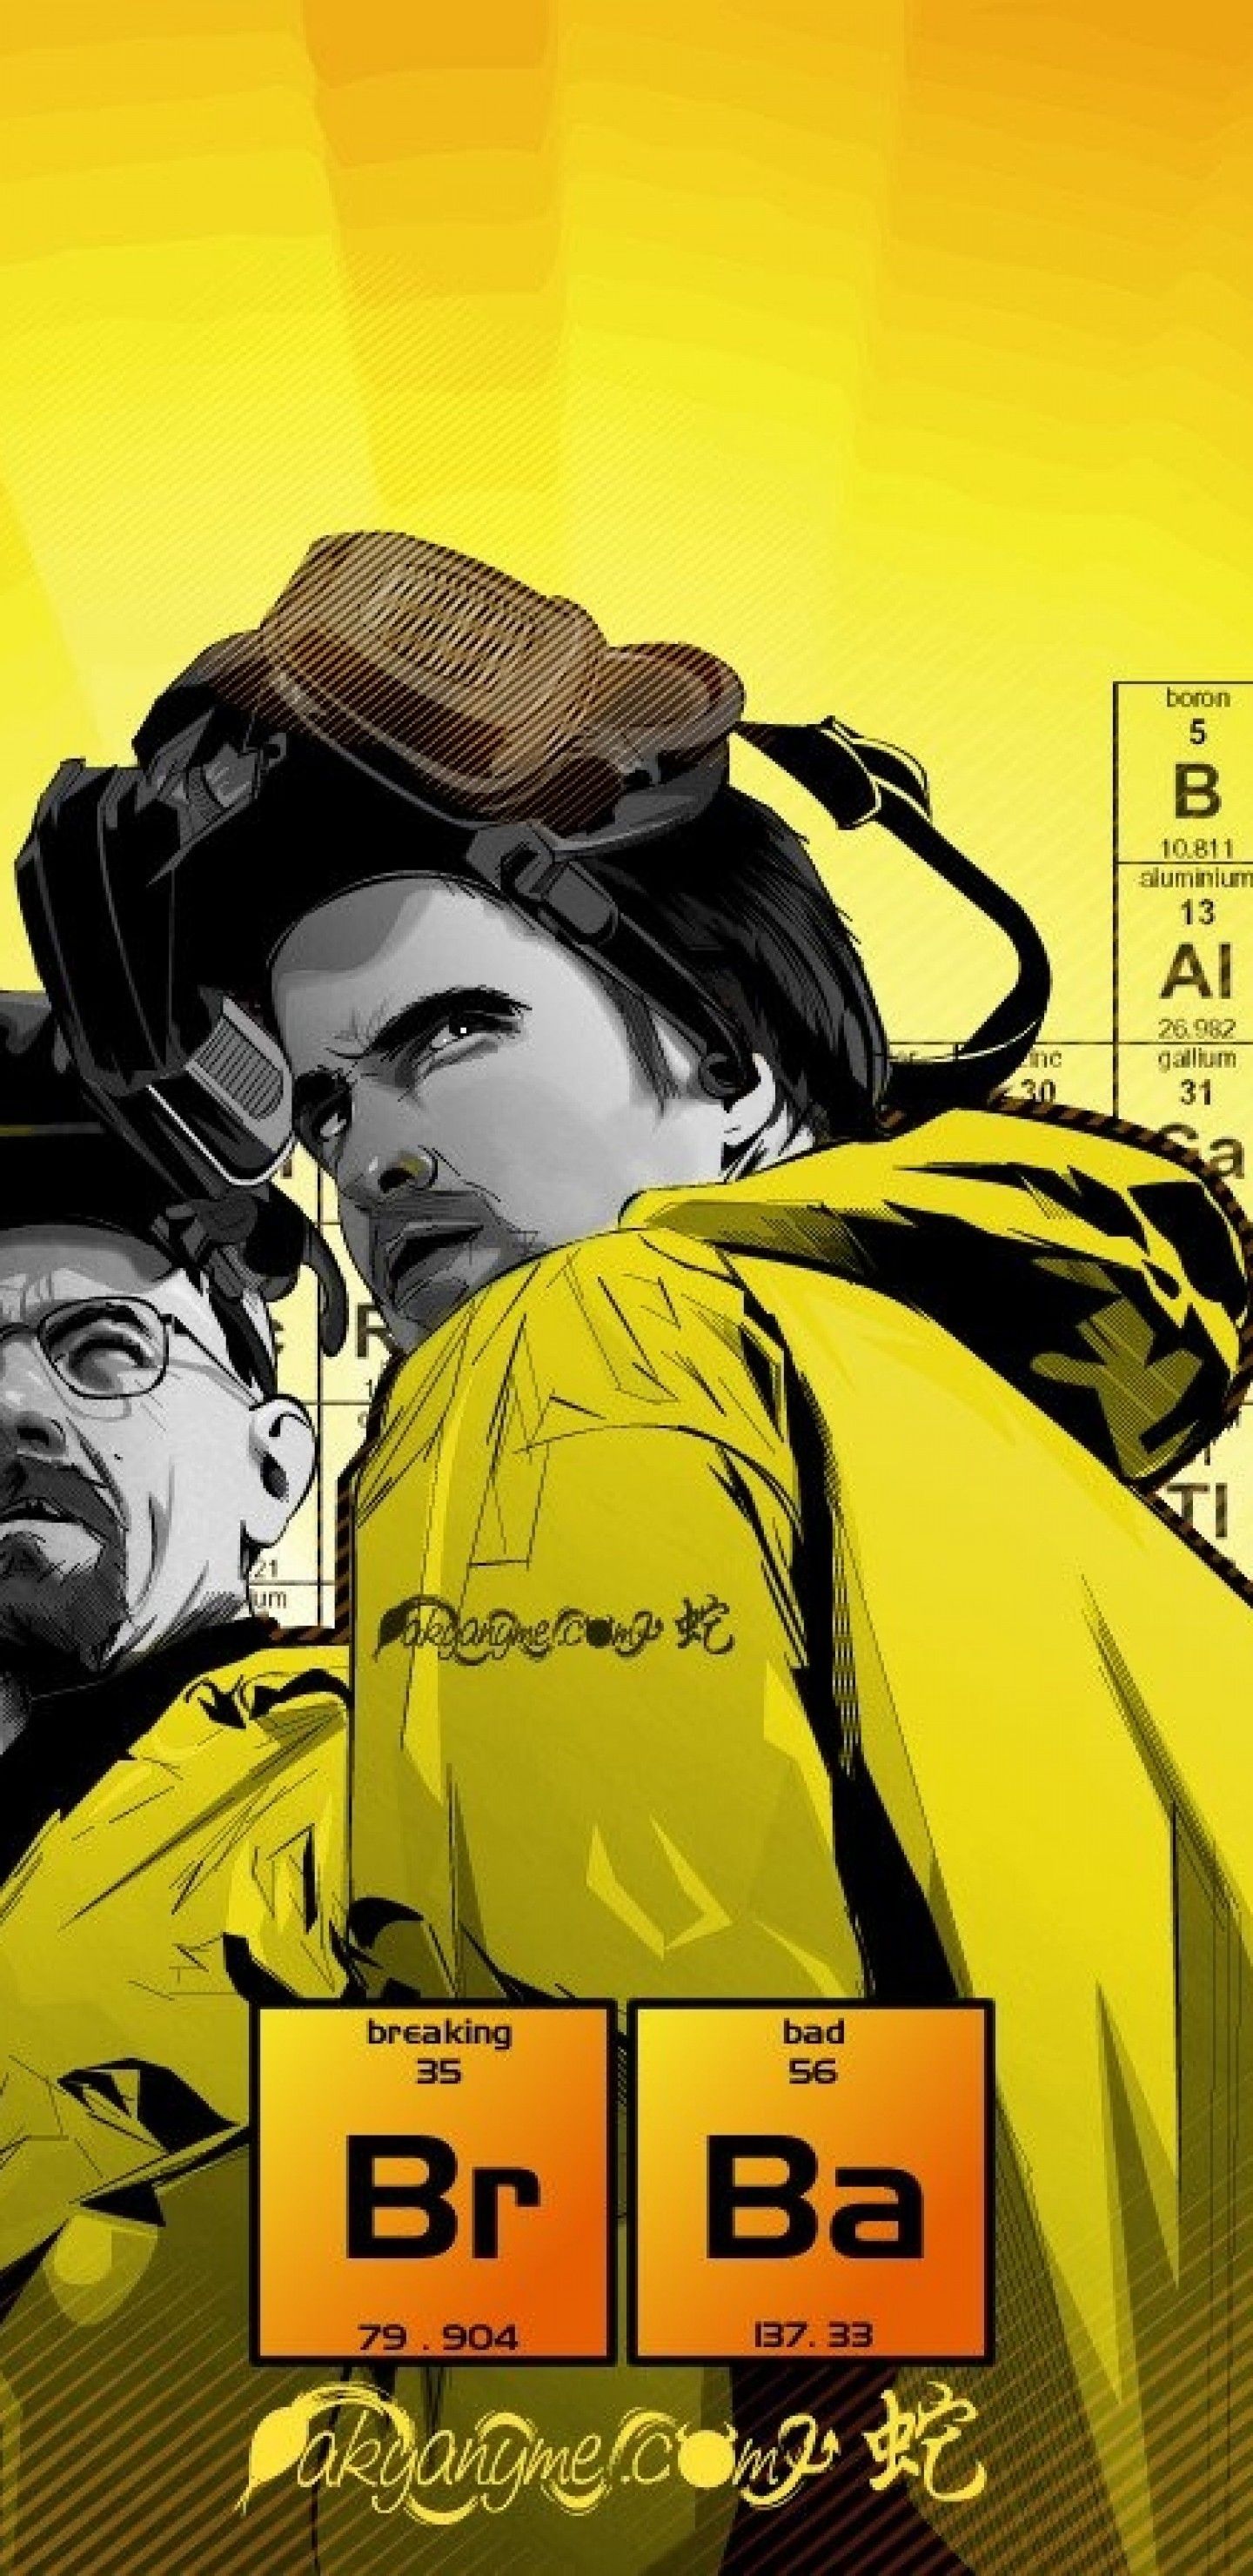 Download 1440x2960 Breaking Bad, Poster Wallpaper for Samsung